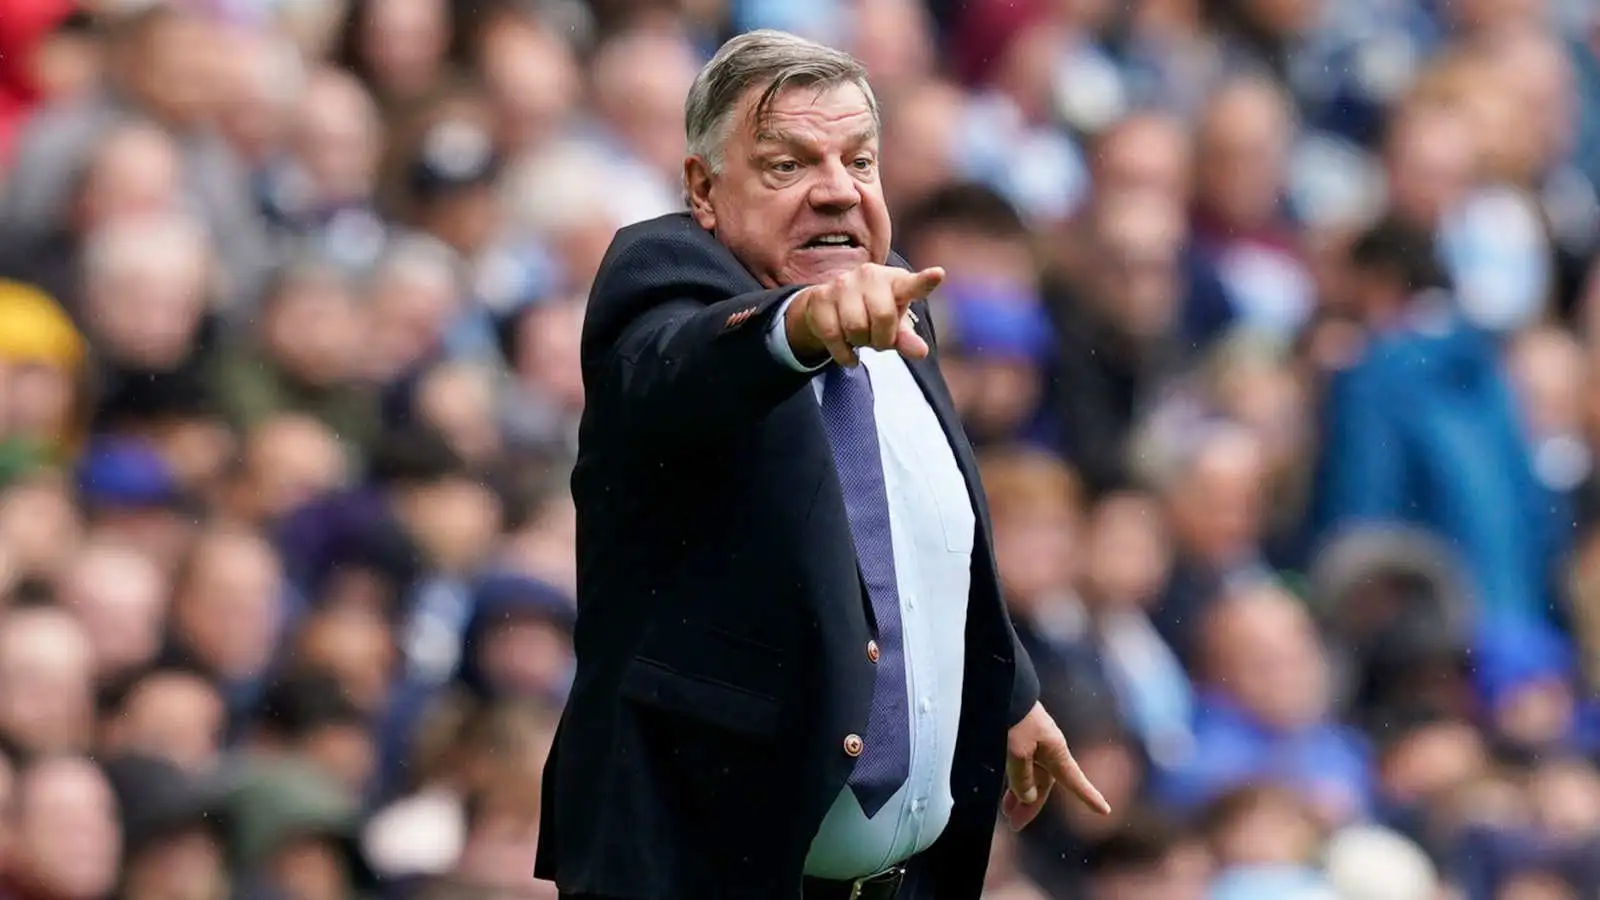 Leeds United manager Sam Allardyce during his team's Premier League match against Manchester City